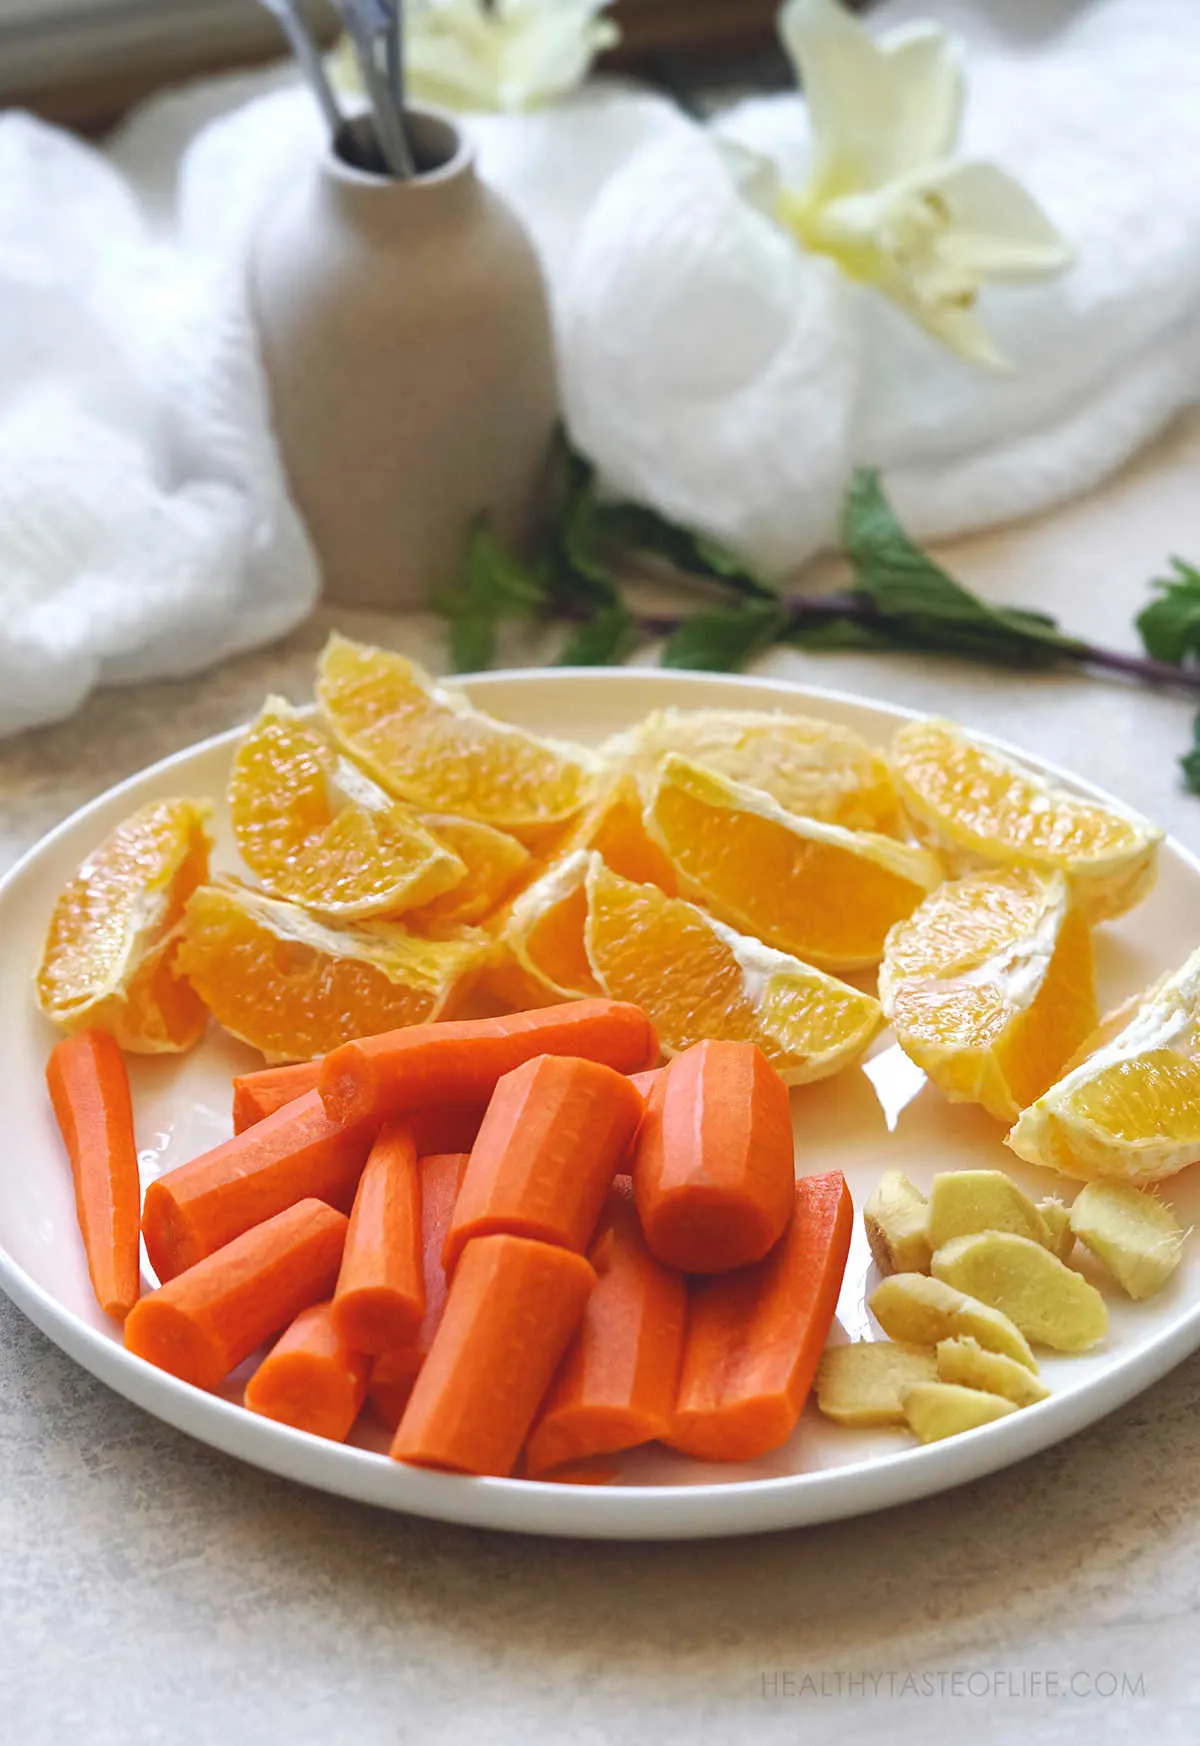 Peeled and chopped carrots, oranges and ginger slices.